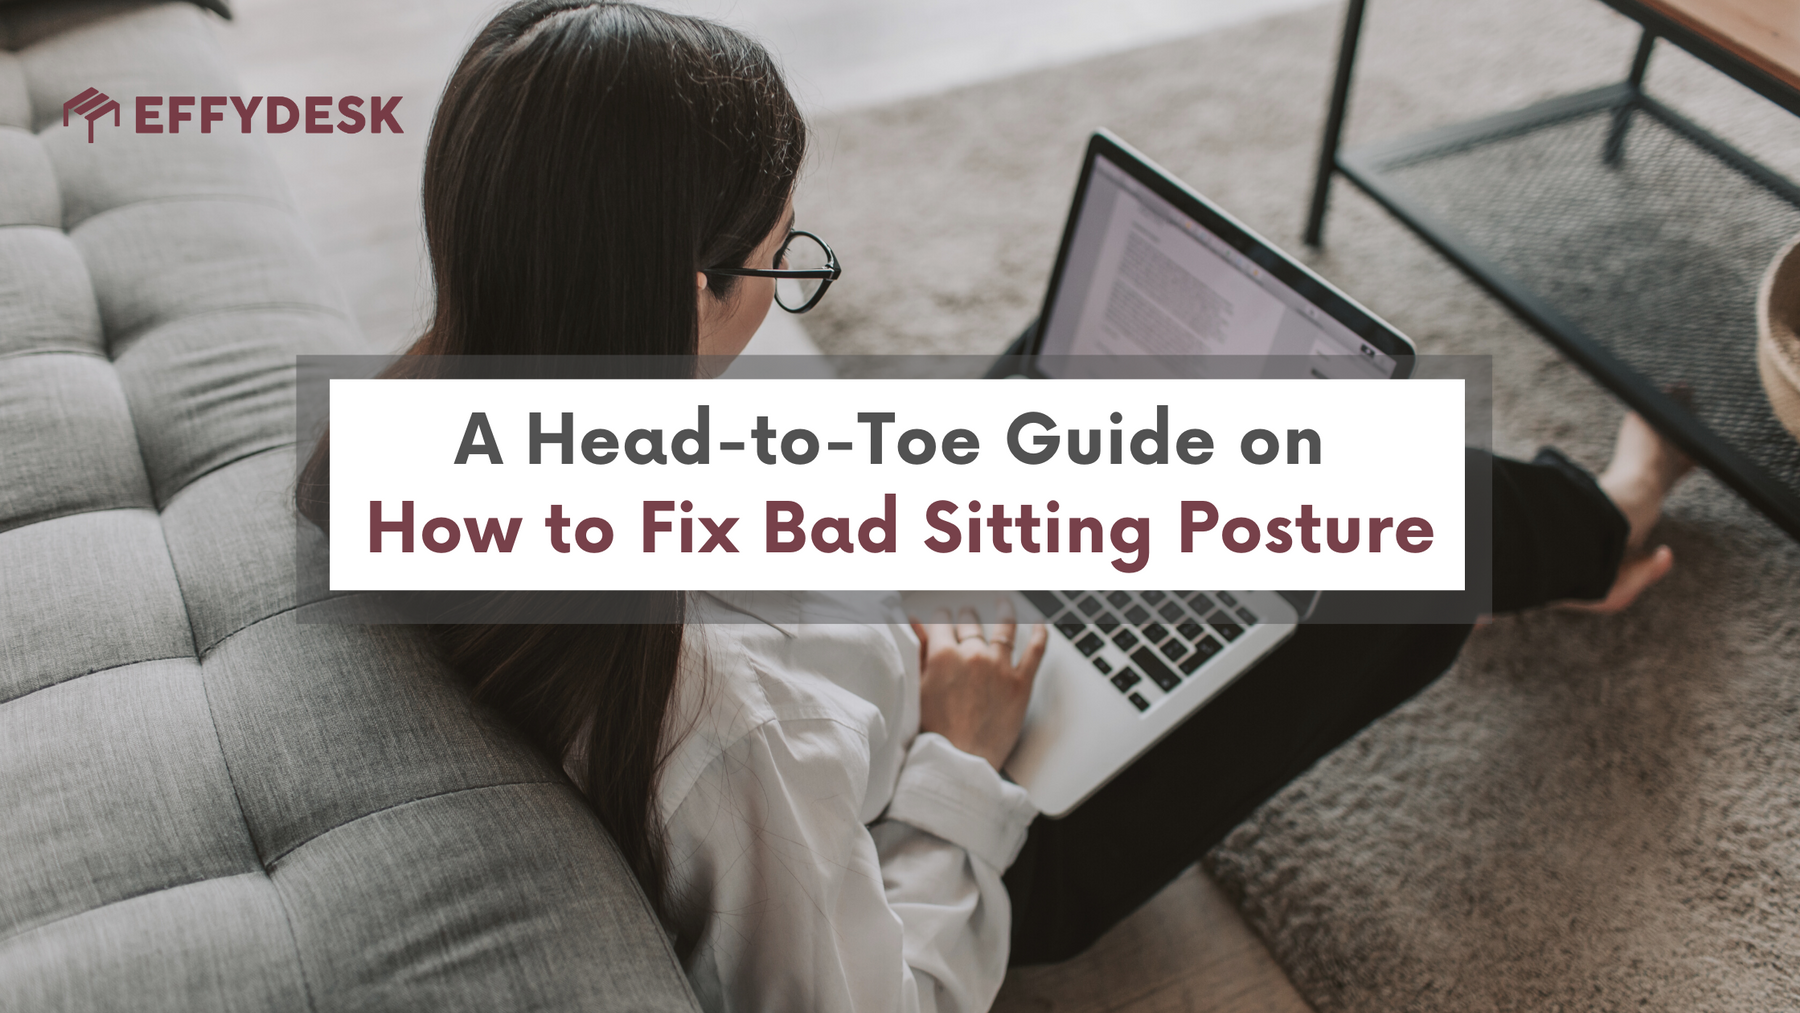 A Head-to-Toe Guide on How to Fix Bad Sitting Posture while you are working